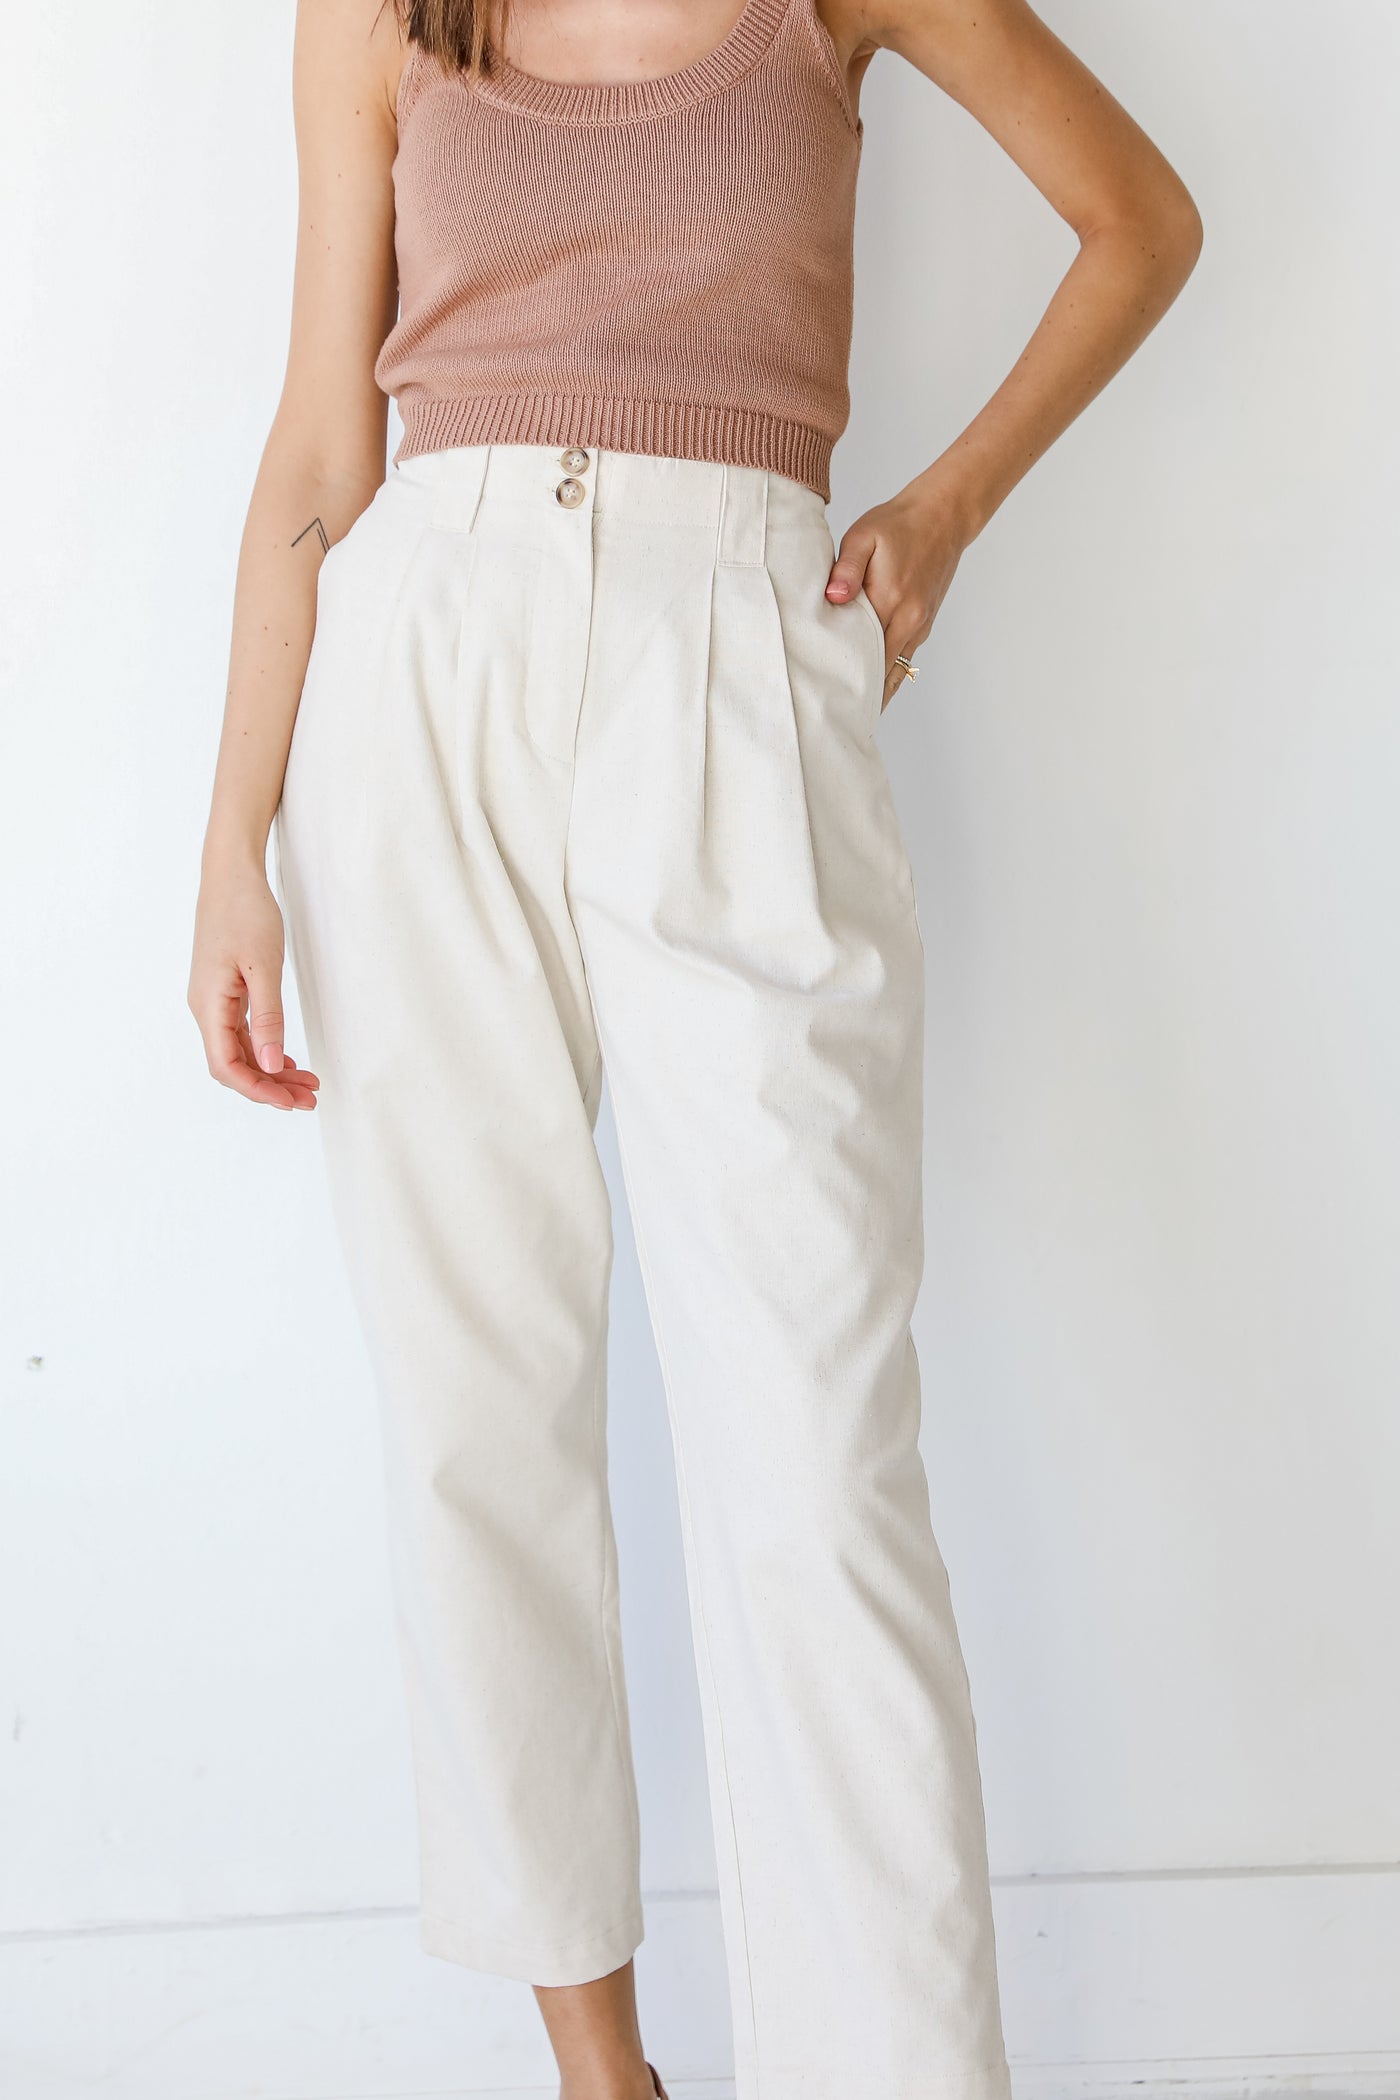 Linen Pants in ivory front view